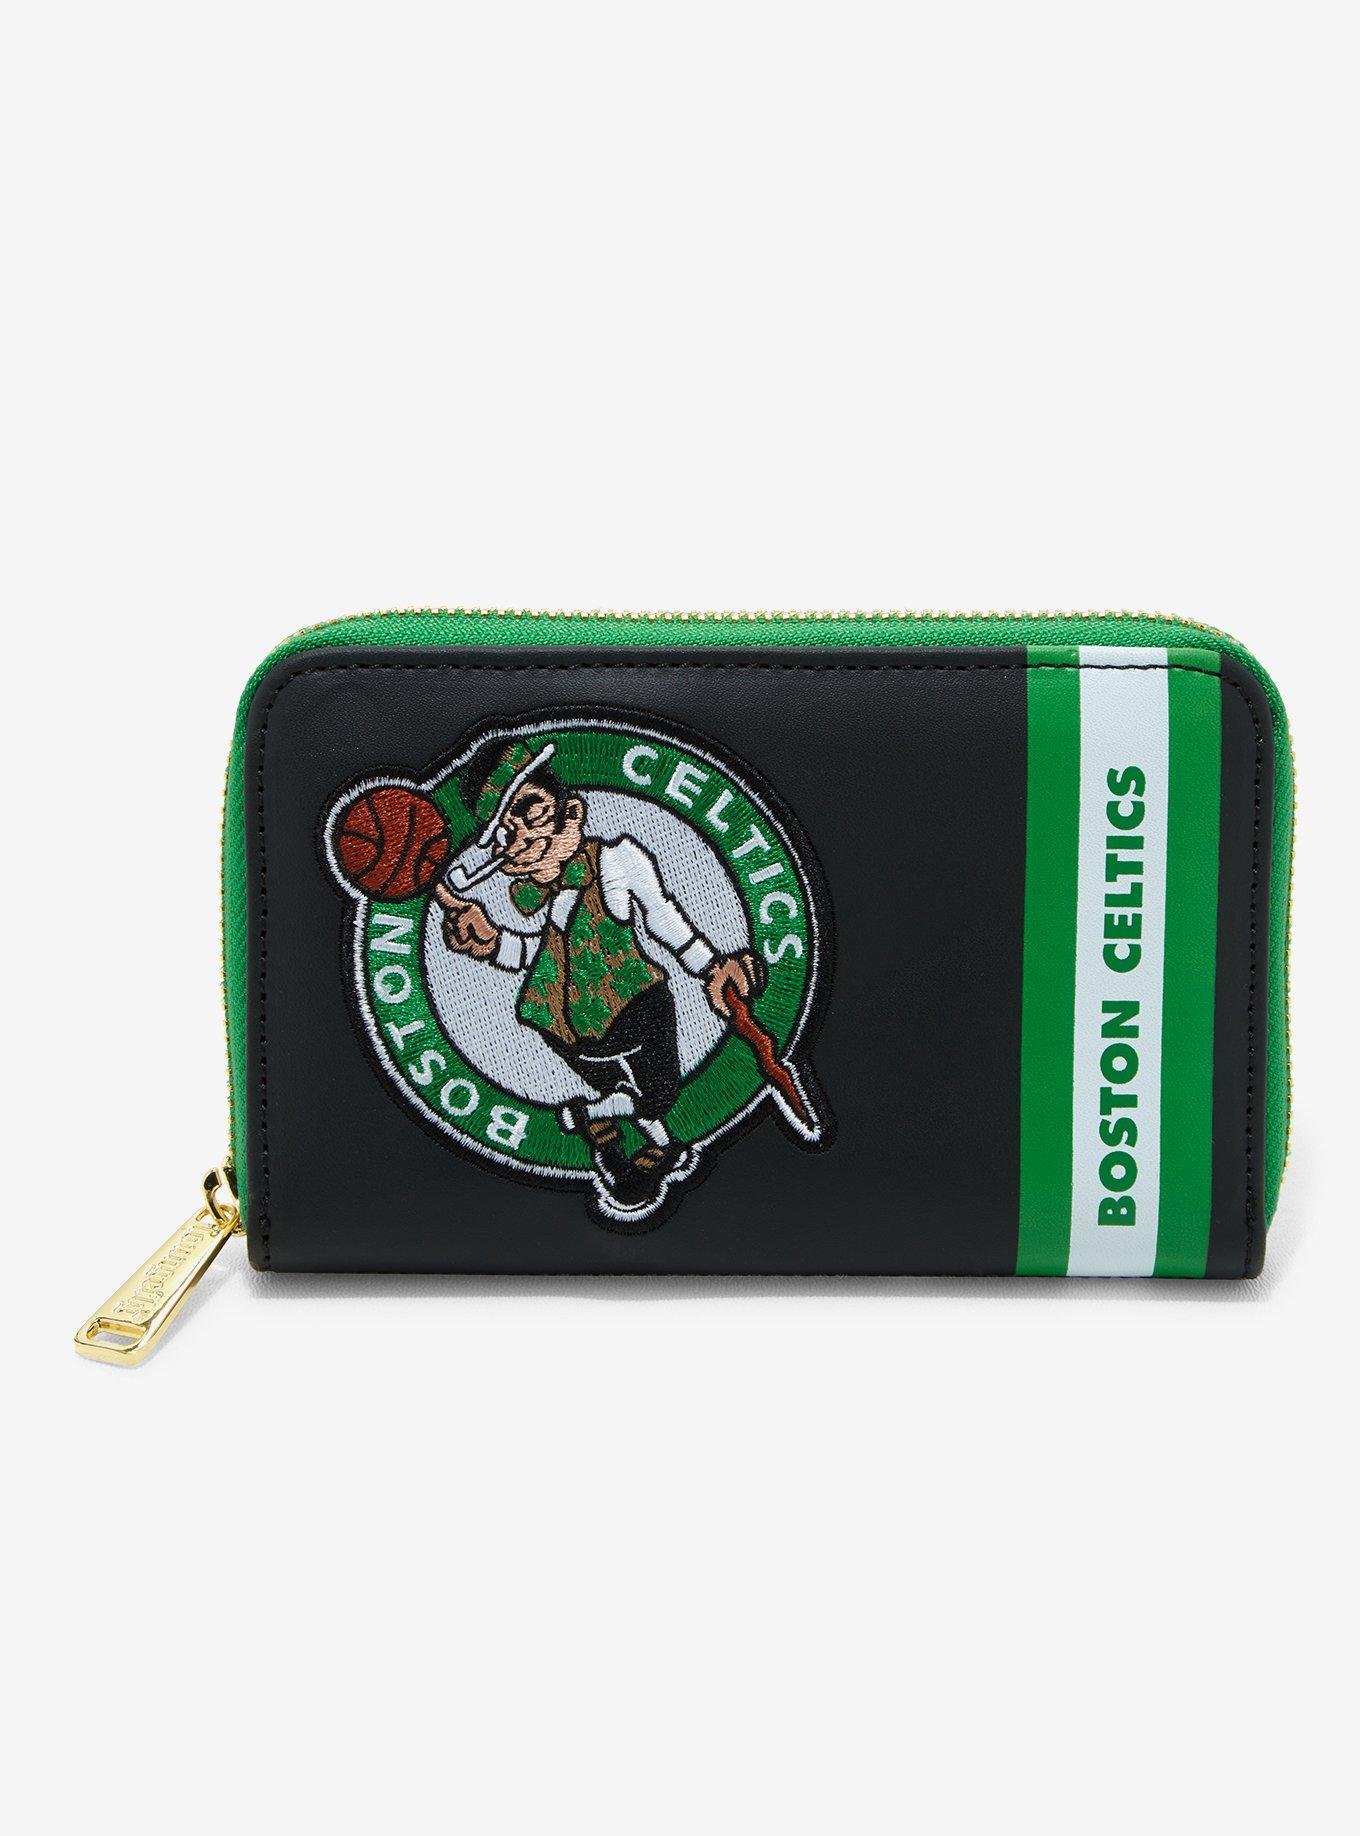 Buy NBA Boston Celtics Patch Icons Mini Backpack at Loungefly.